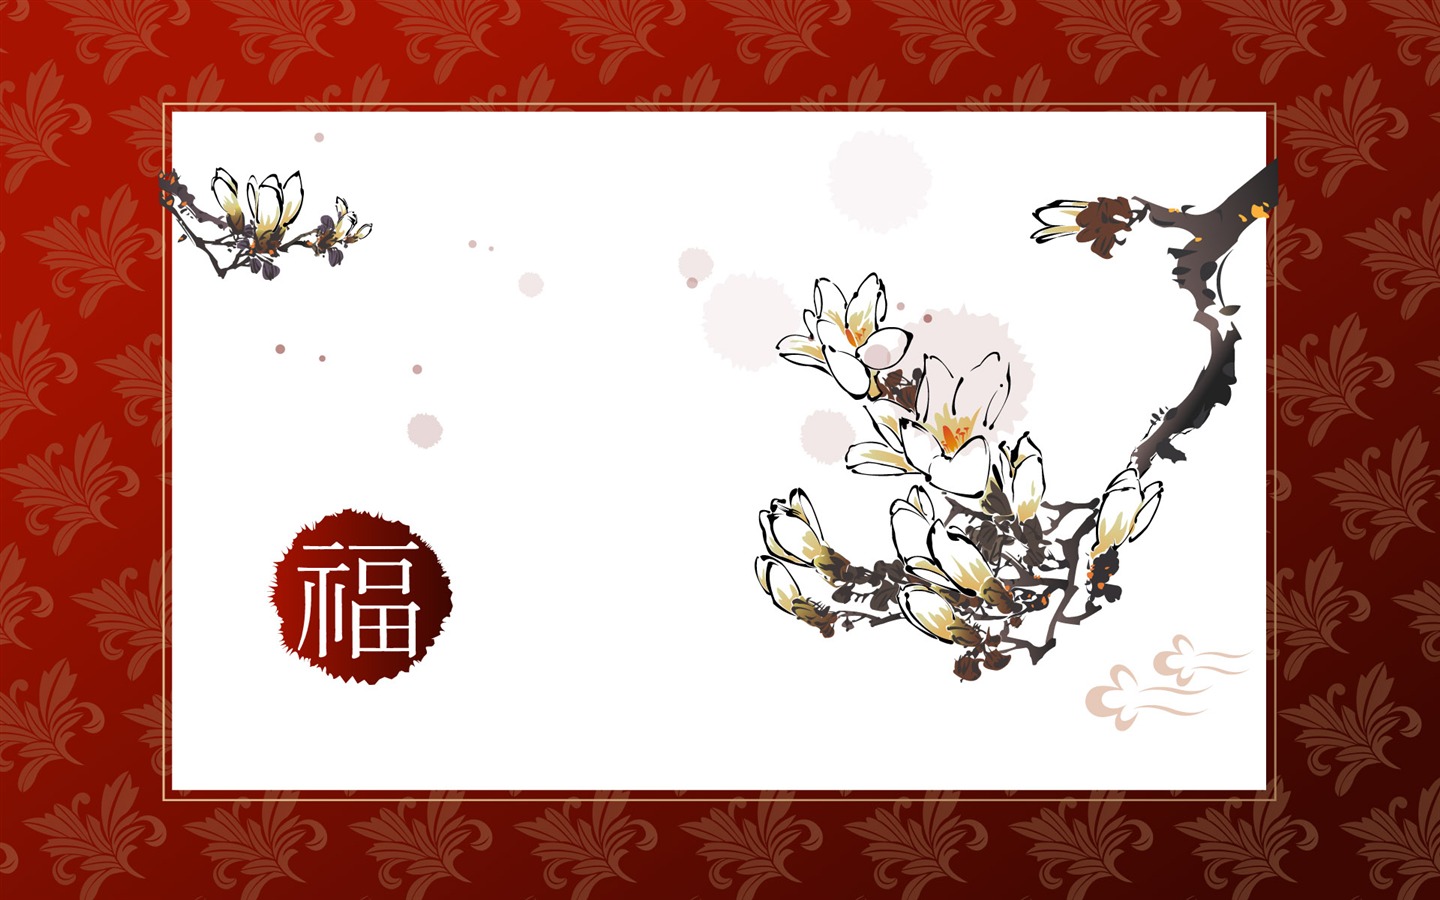 New Year's special edition of Wallpaper (2) #2 - 1440x900